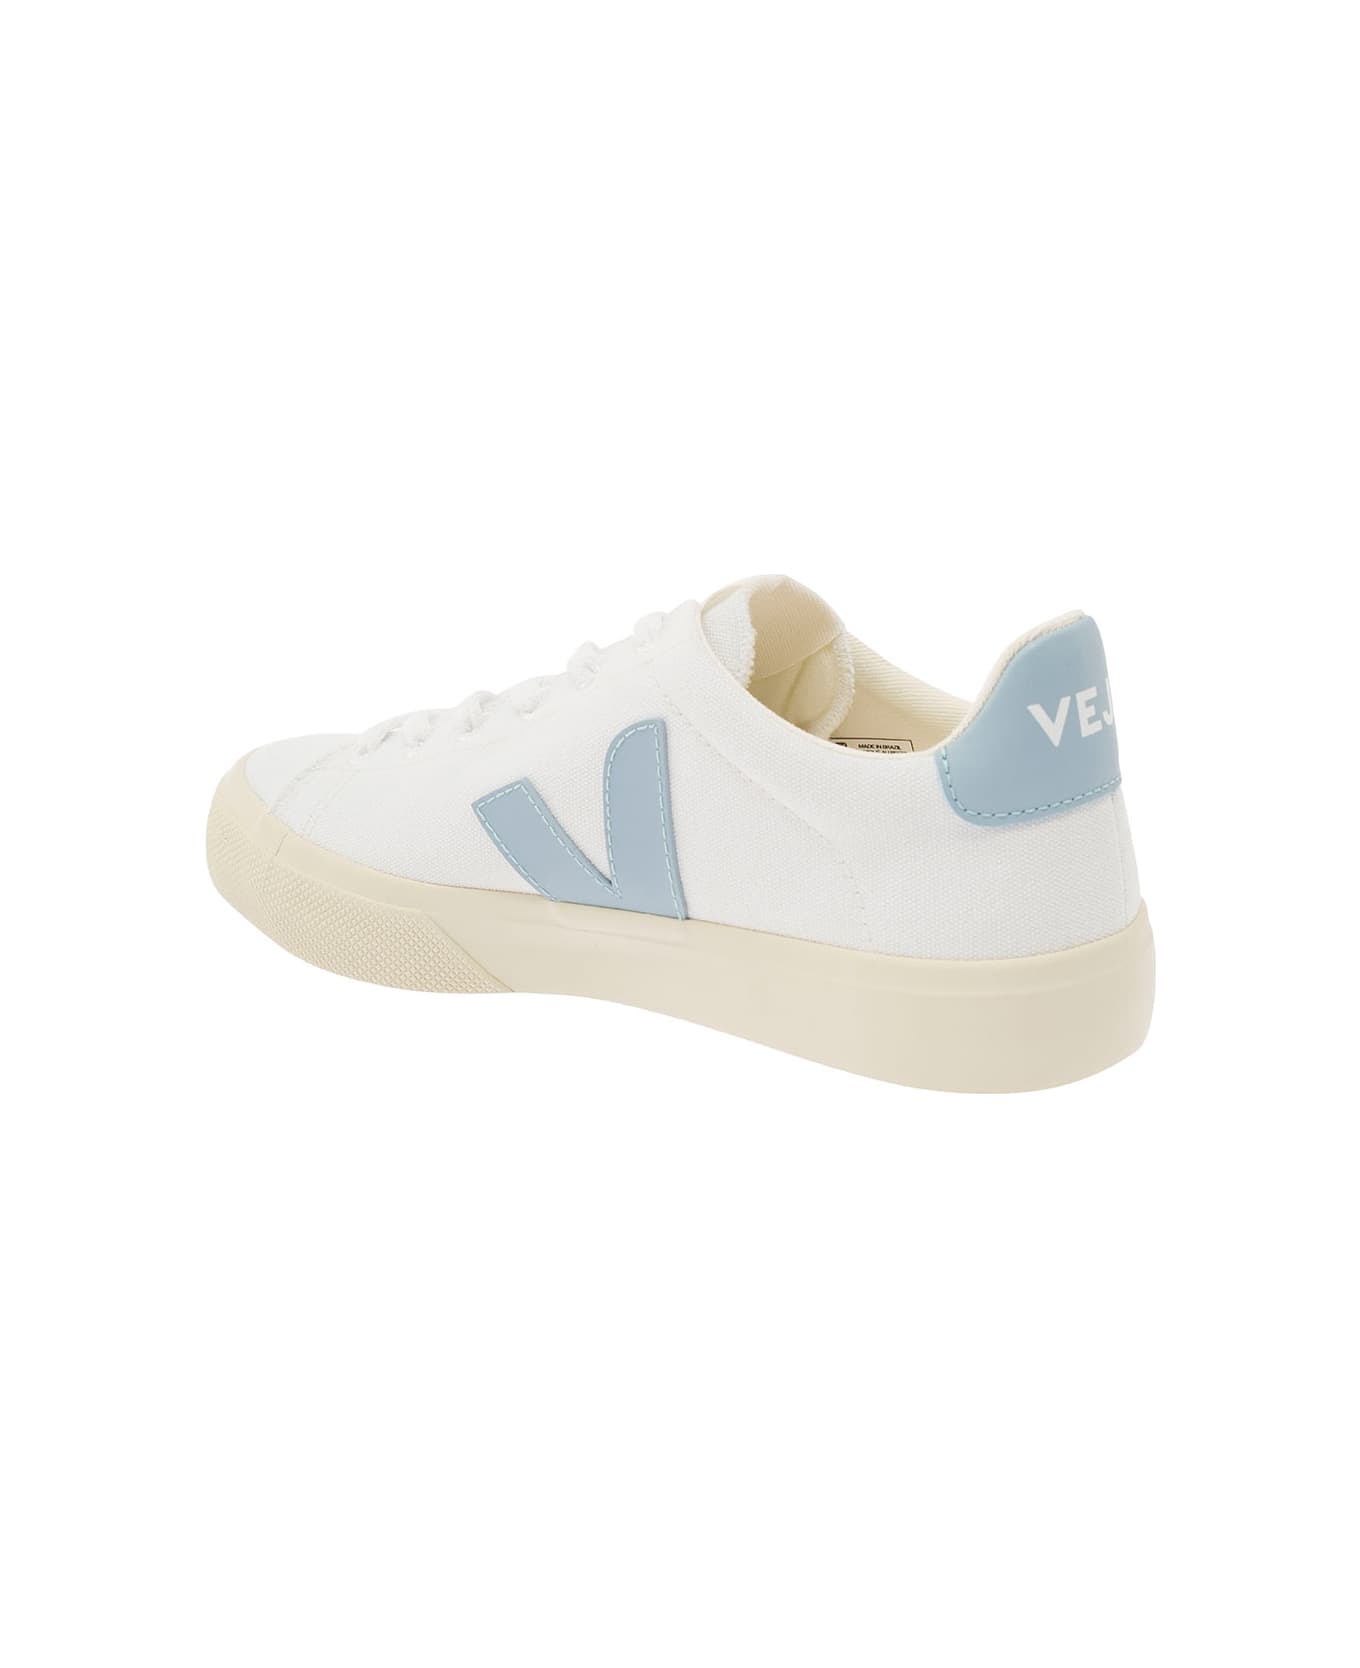 Veja White And Light Blue Sneakers With Logo Details In Leather Woman - White